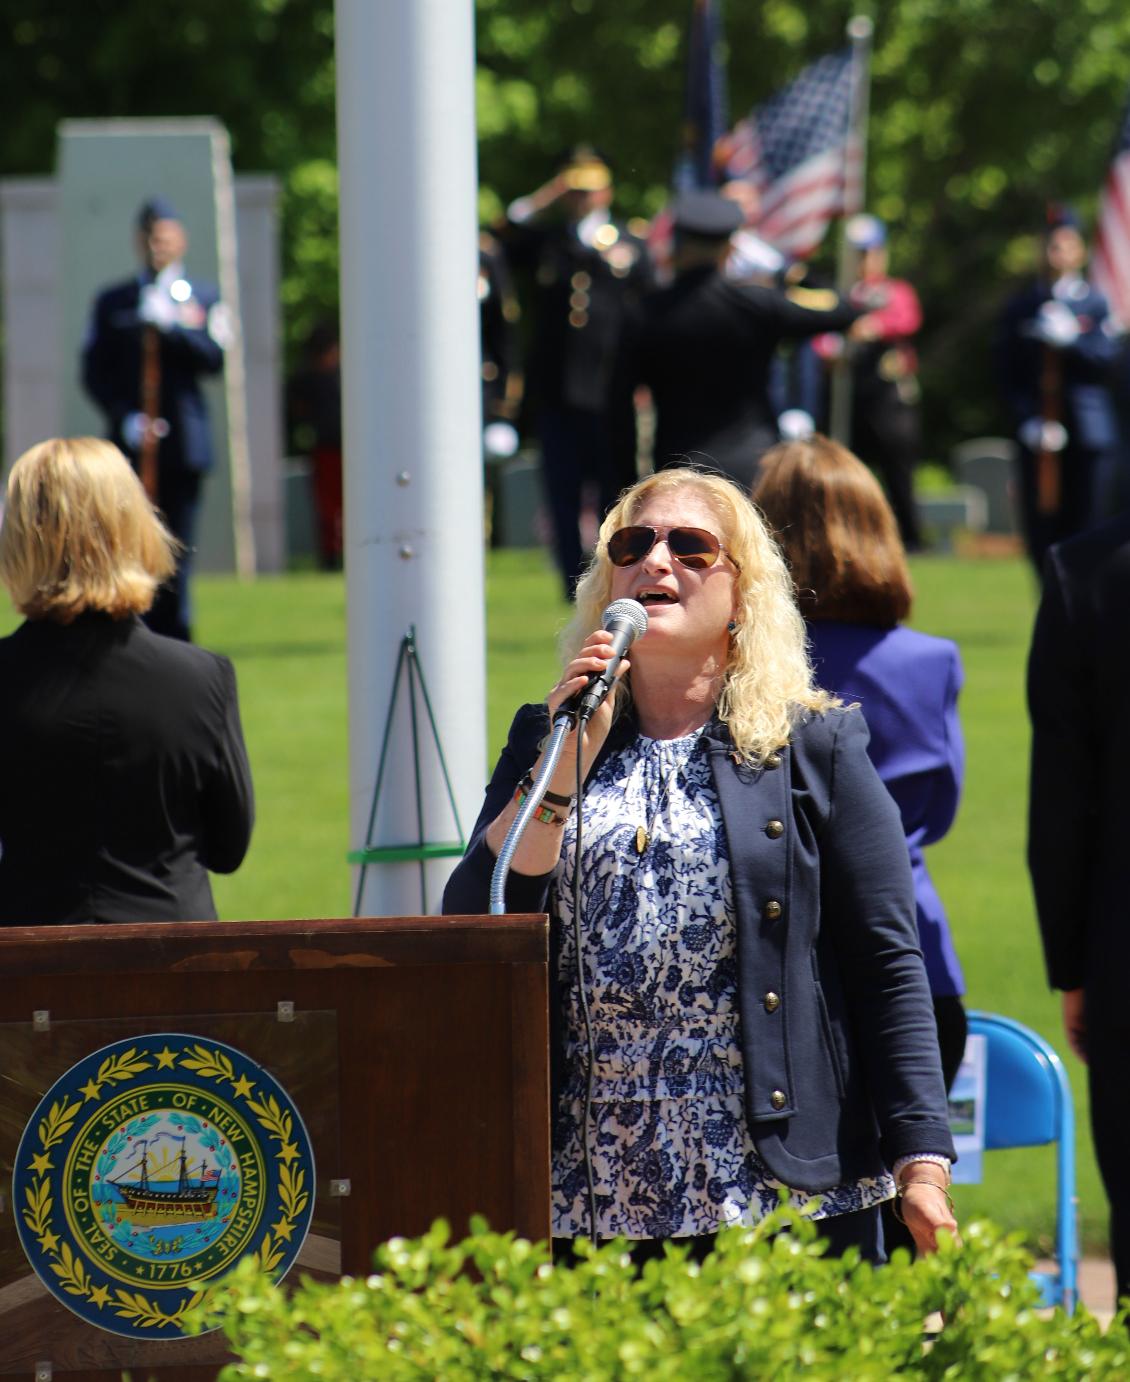 Memorial Day Ceremony 2022 New Hampshire State Veterans Cemetery - Nichole Knox Murphy